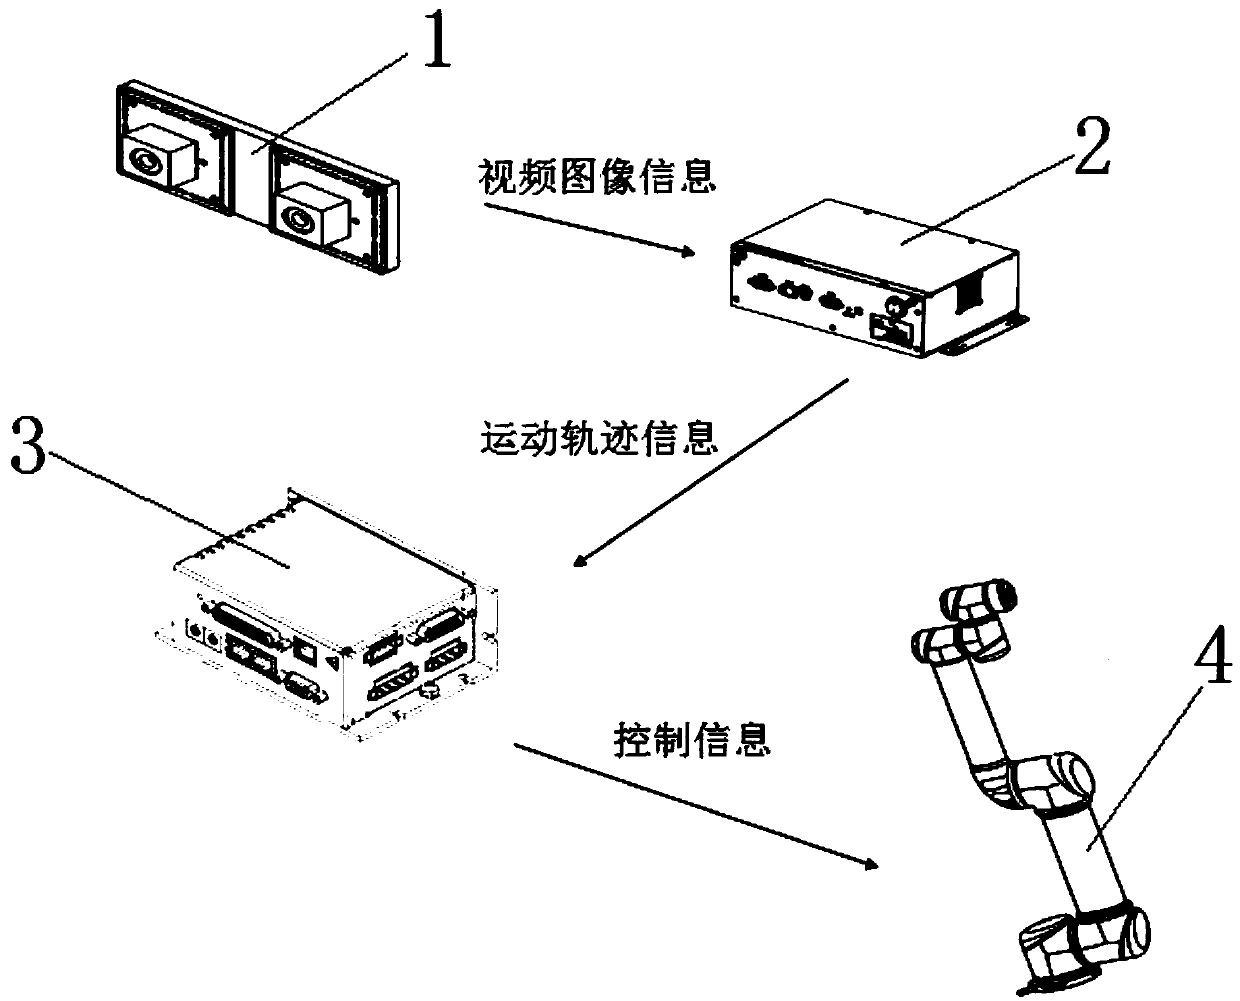 Robot intelligent obstacle avoidance system and method based on stereoscopic vision